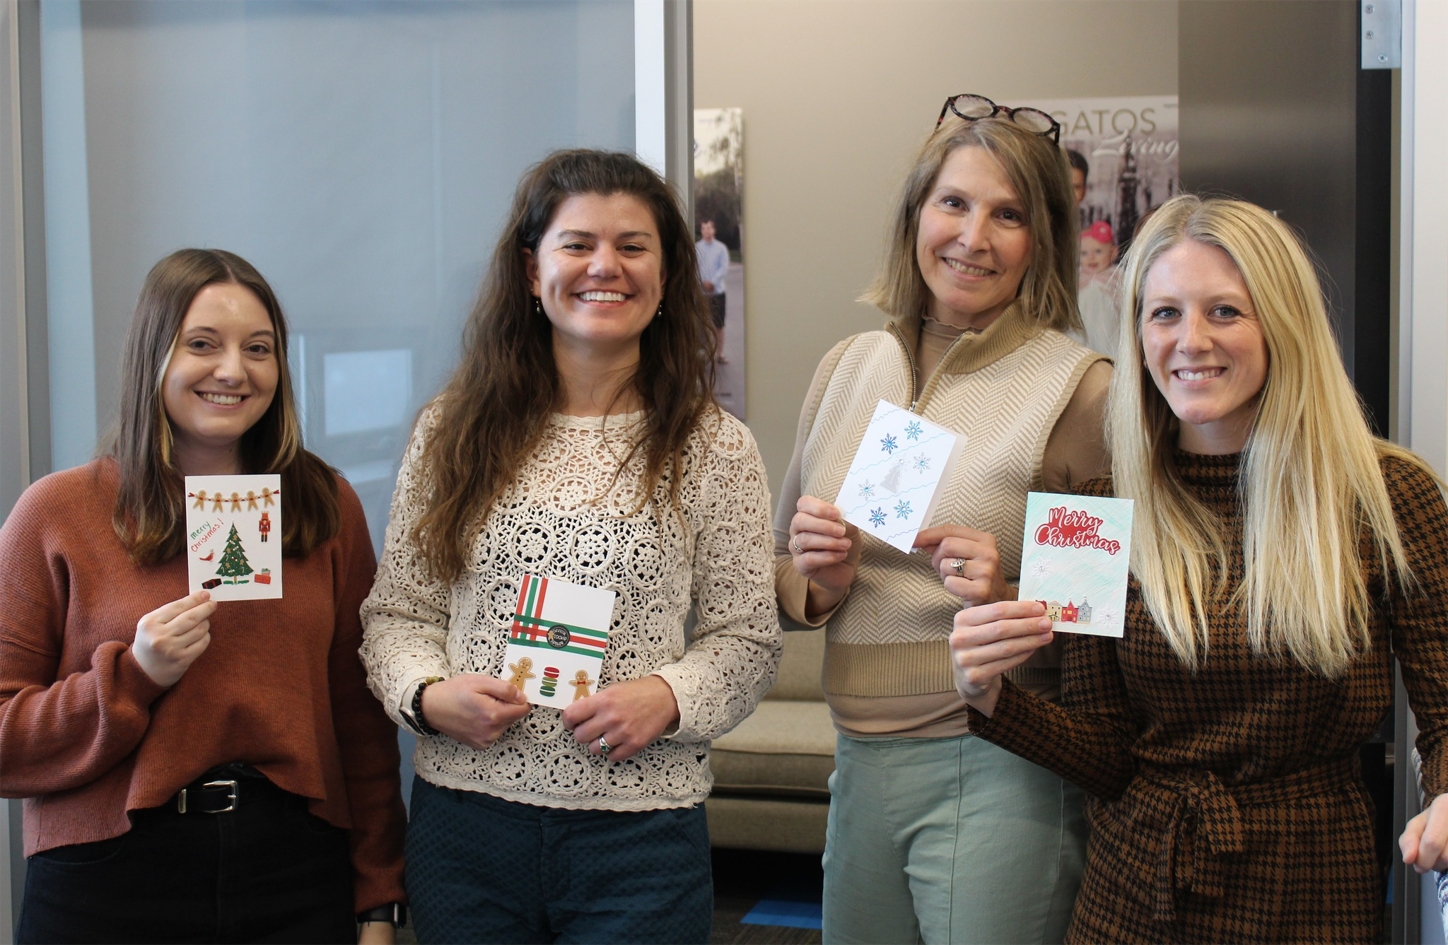 BVM employees decorated holiday cards for local seniors in coordination with Eras Senior Network.